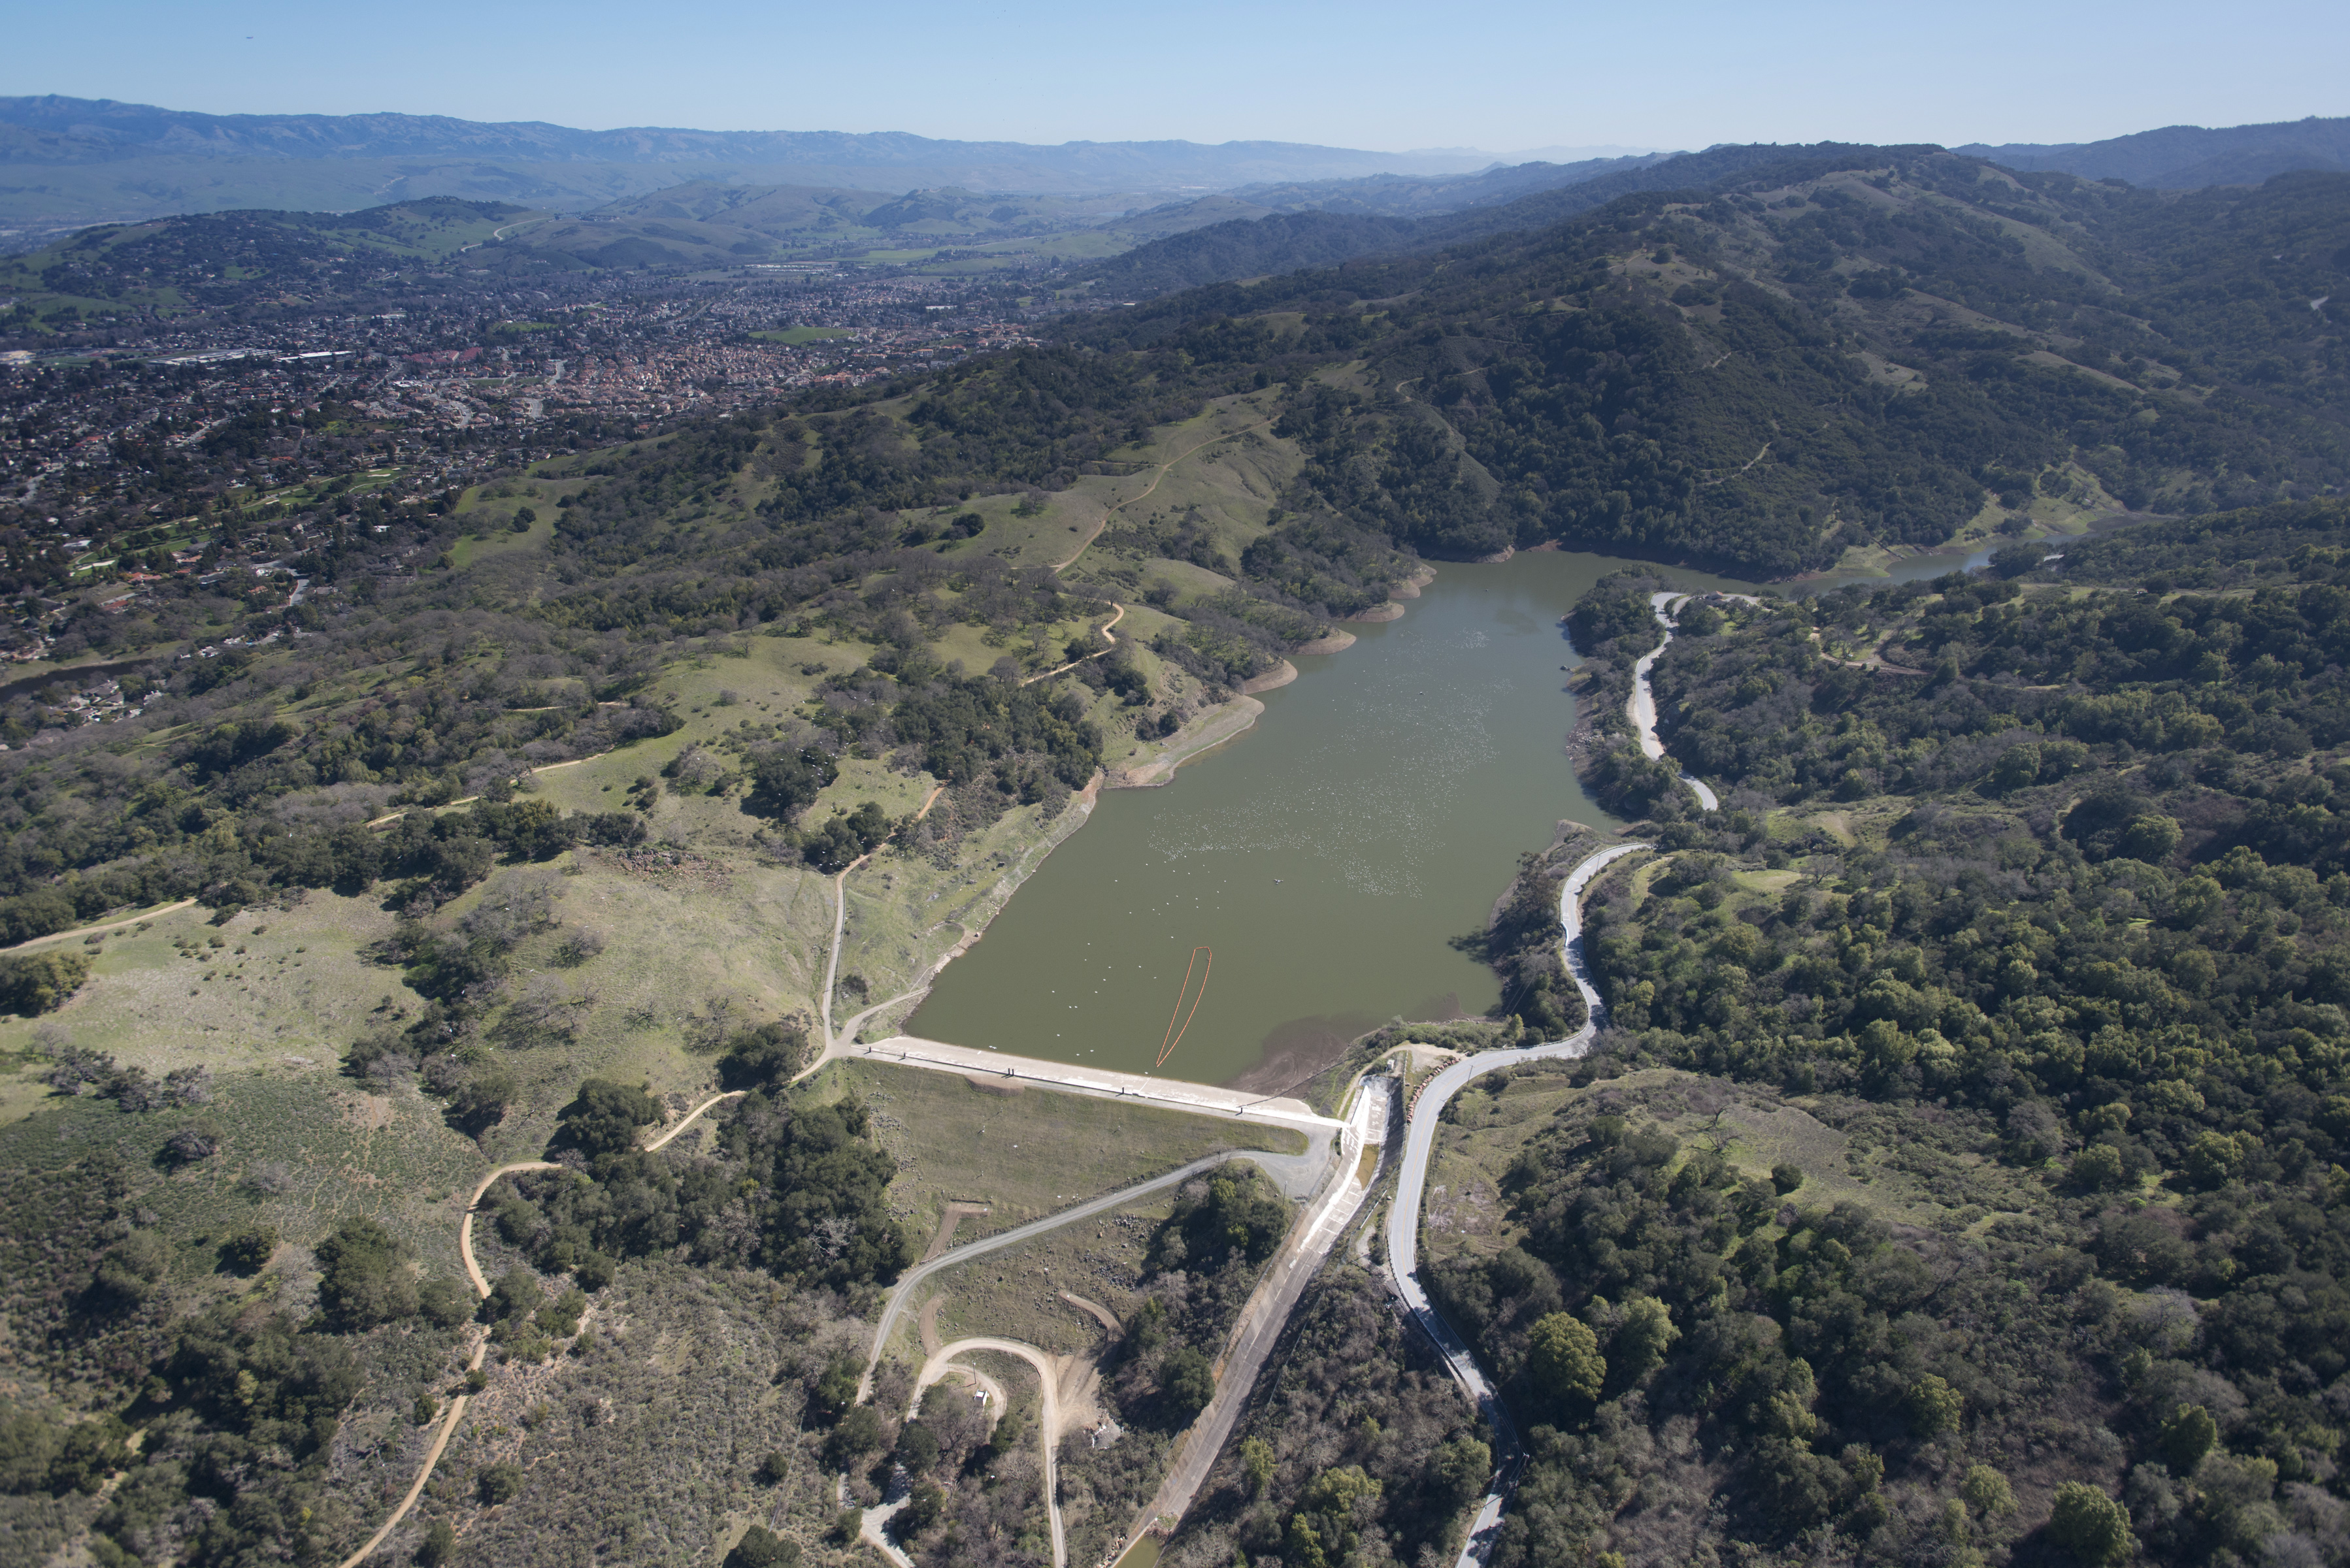 Guadalupe dam and reservoir